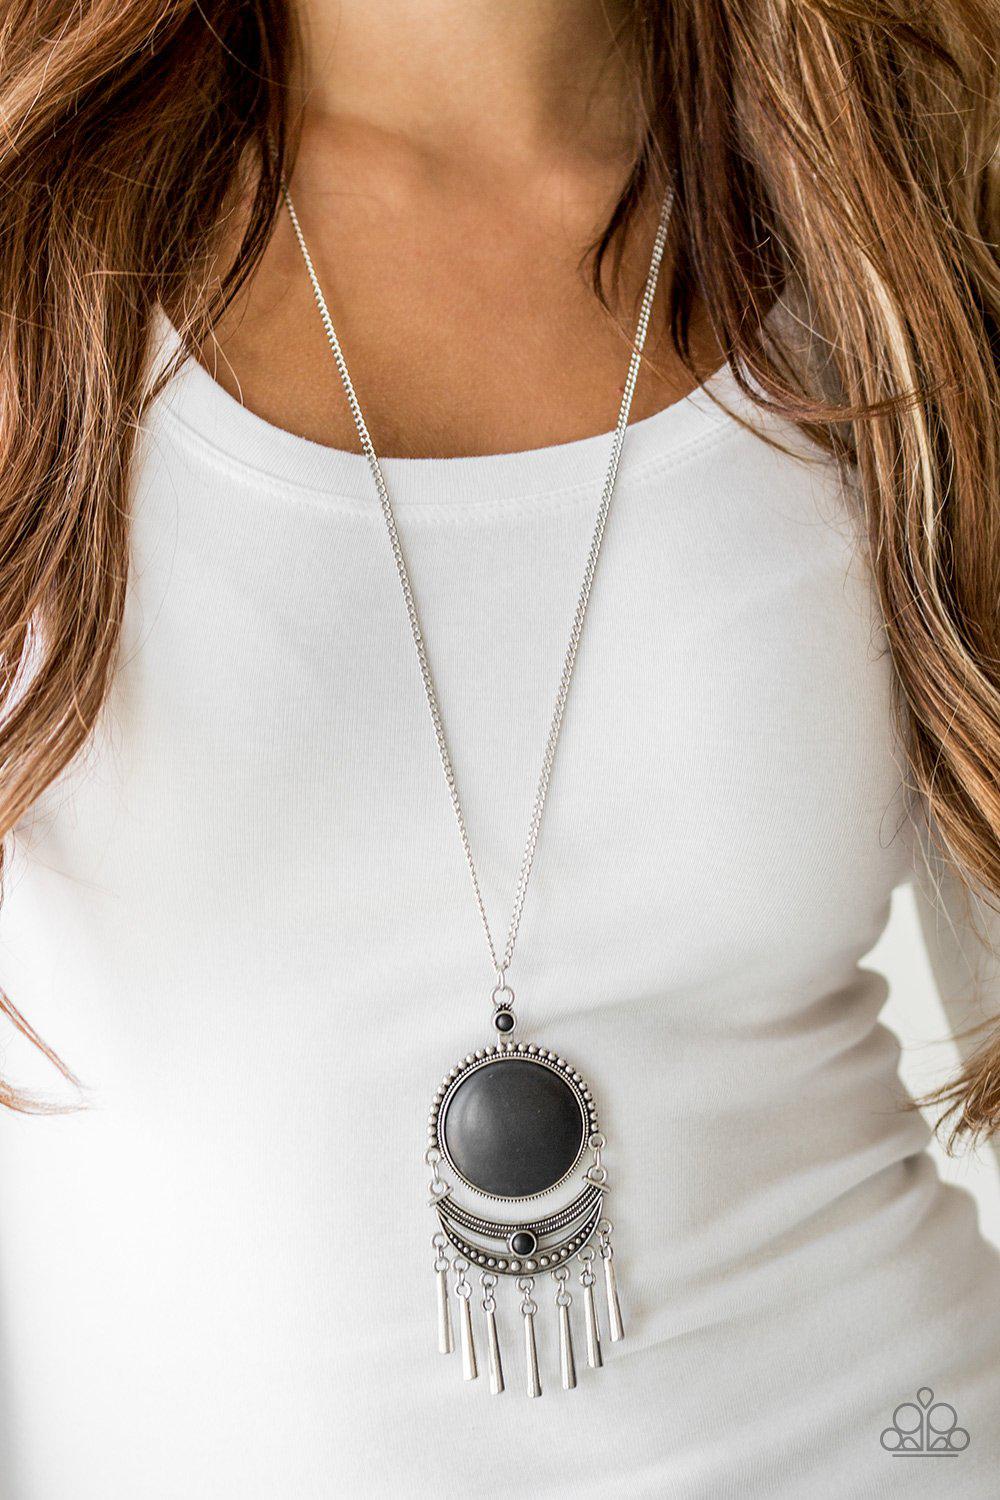 Rural Rustler Black Stone Necklace - Paparazzi Accessories- model - CarasShop.com - $5 Jewelry by Cara Jewels